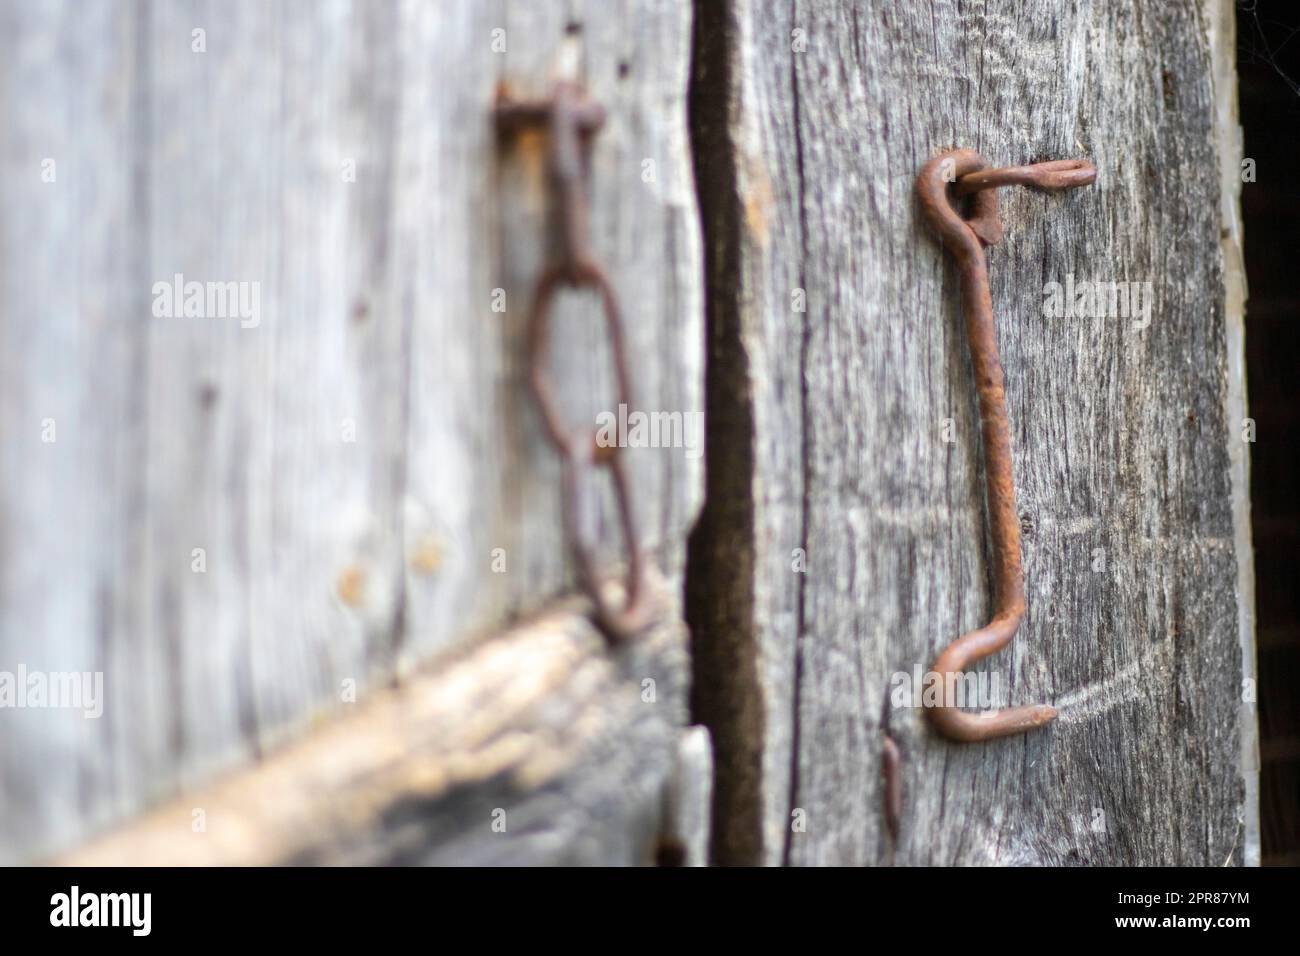 Isolated old rusty door latch on a wooden door. Close-up. Problematic weathered panels. Old wall texture background. Detail of an old wooden door with a rusty door latch. Stock Photo